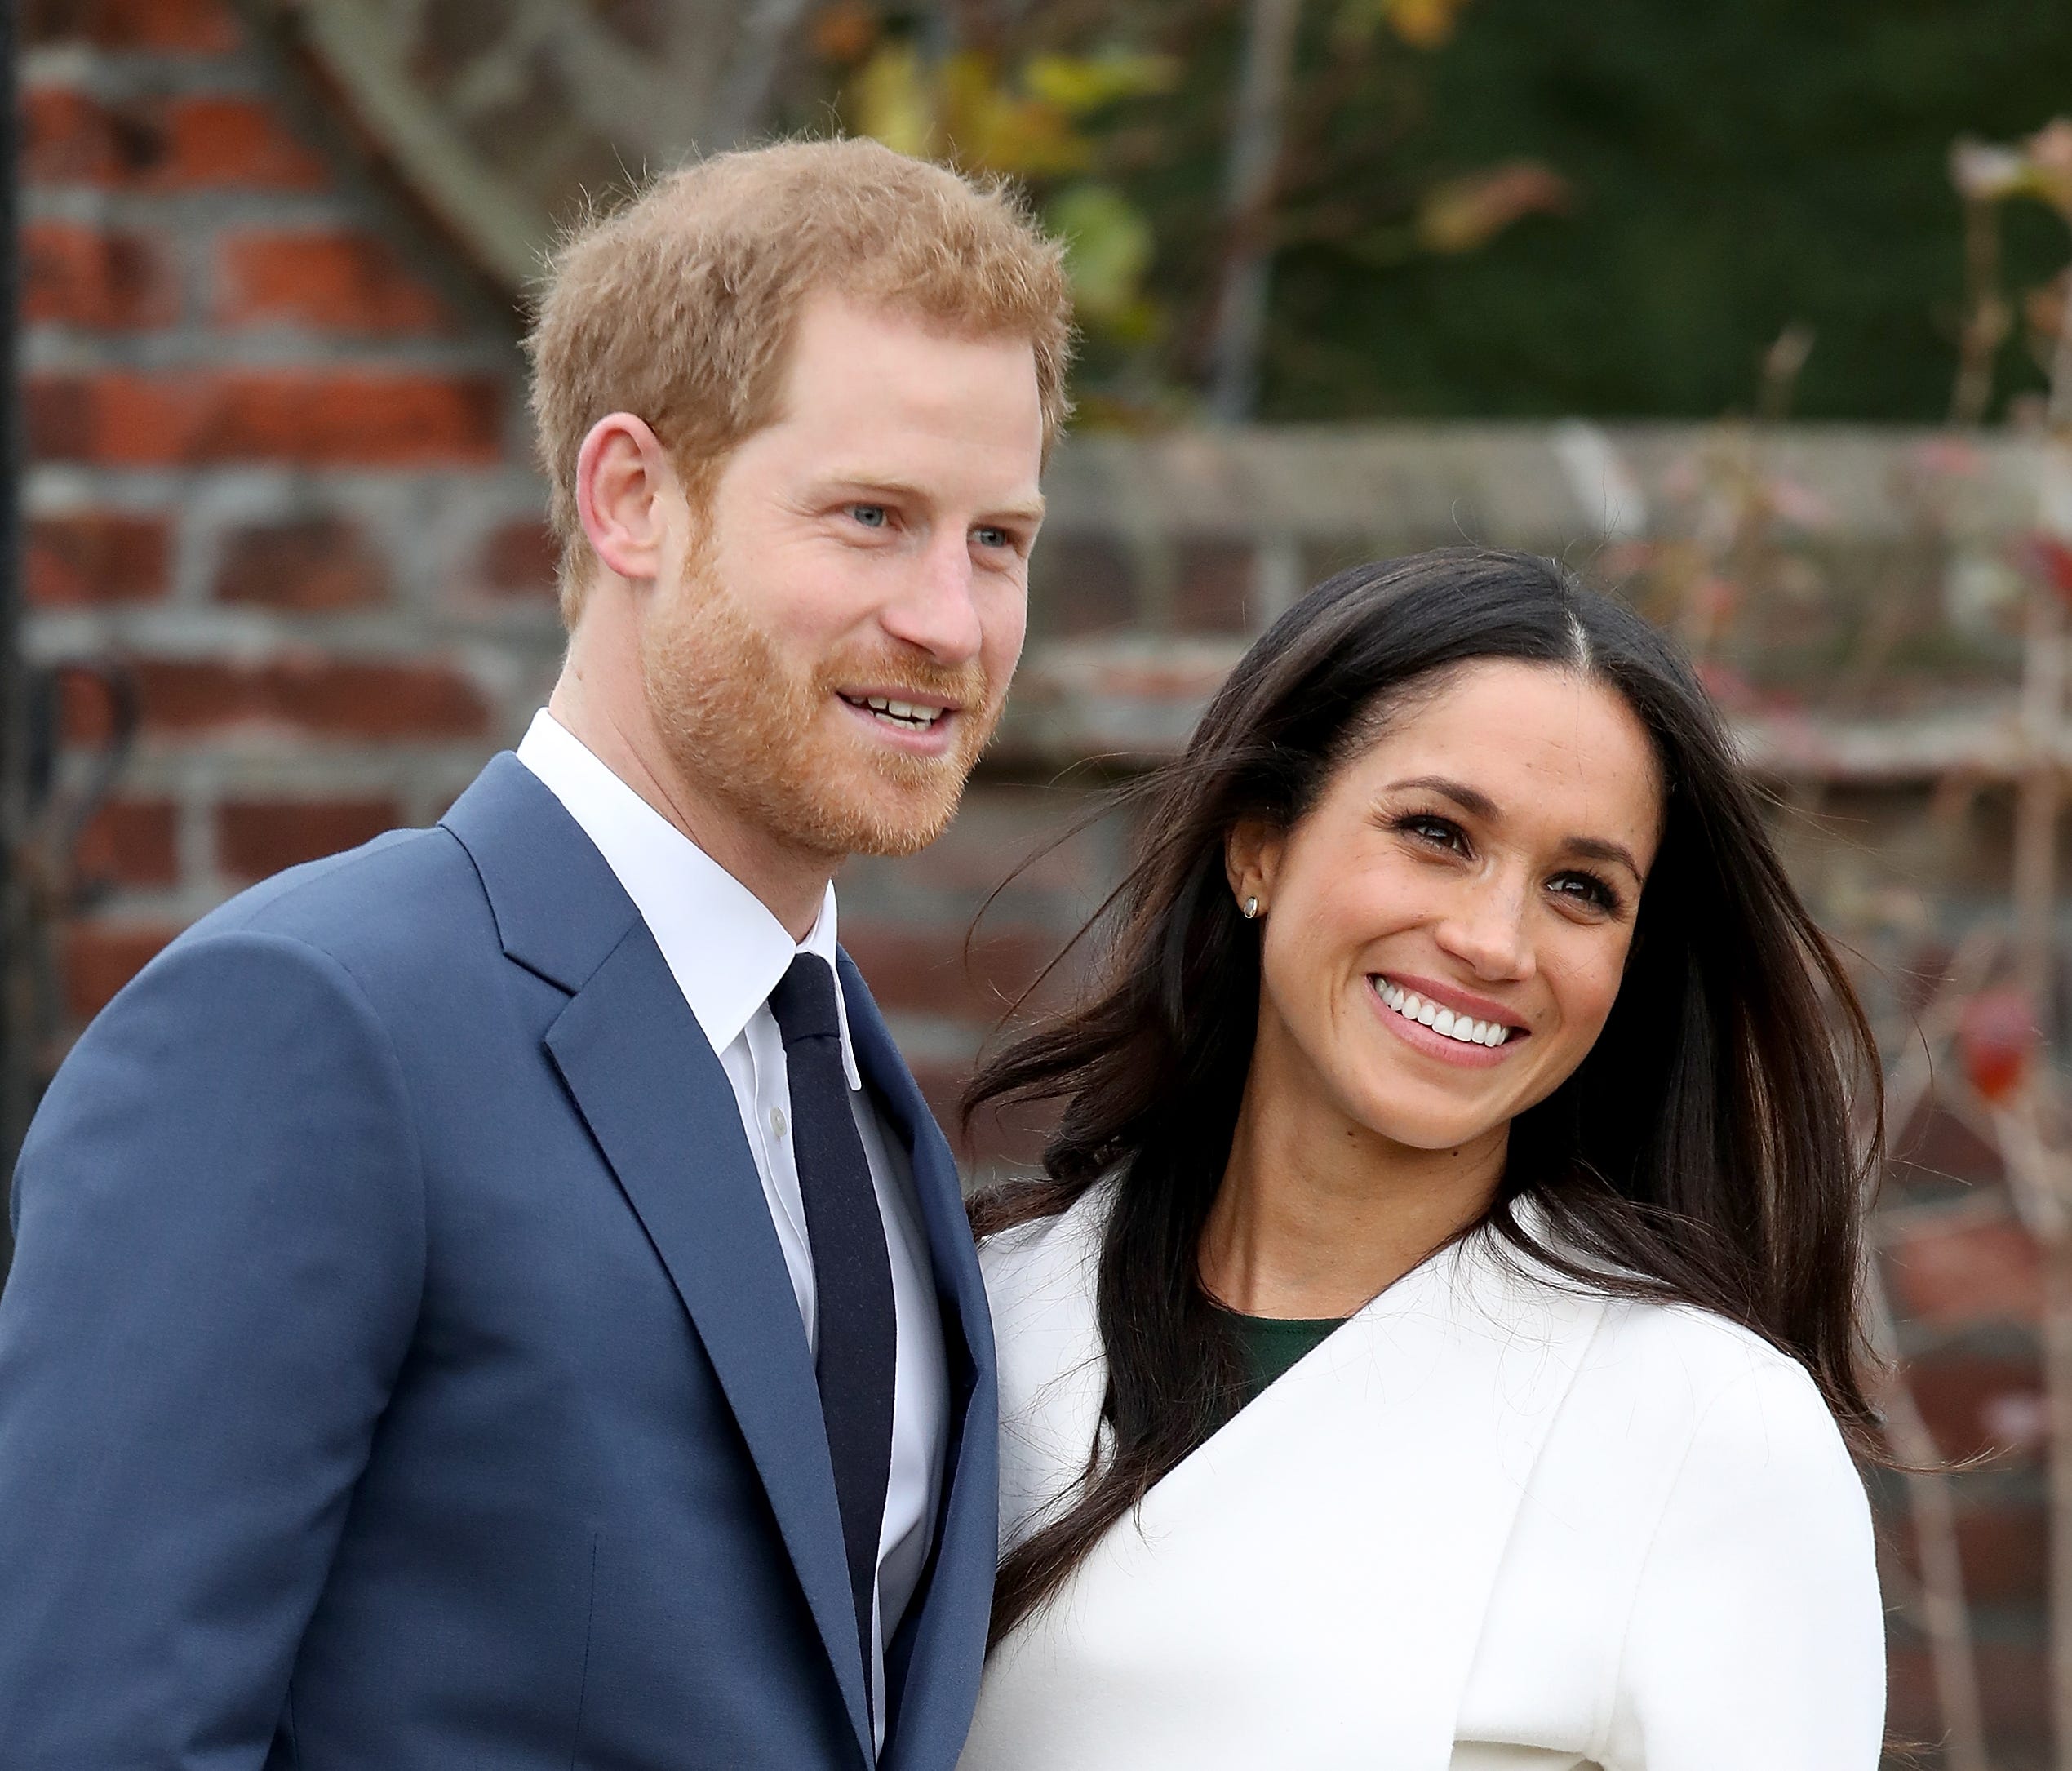 Prince Harry and his fiance, Meghan Markle, announced their engagement on Nov. 27, 2017 at Kensington Palace.